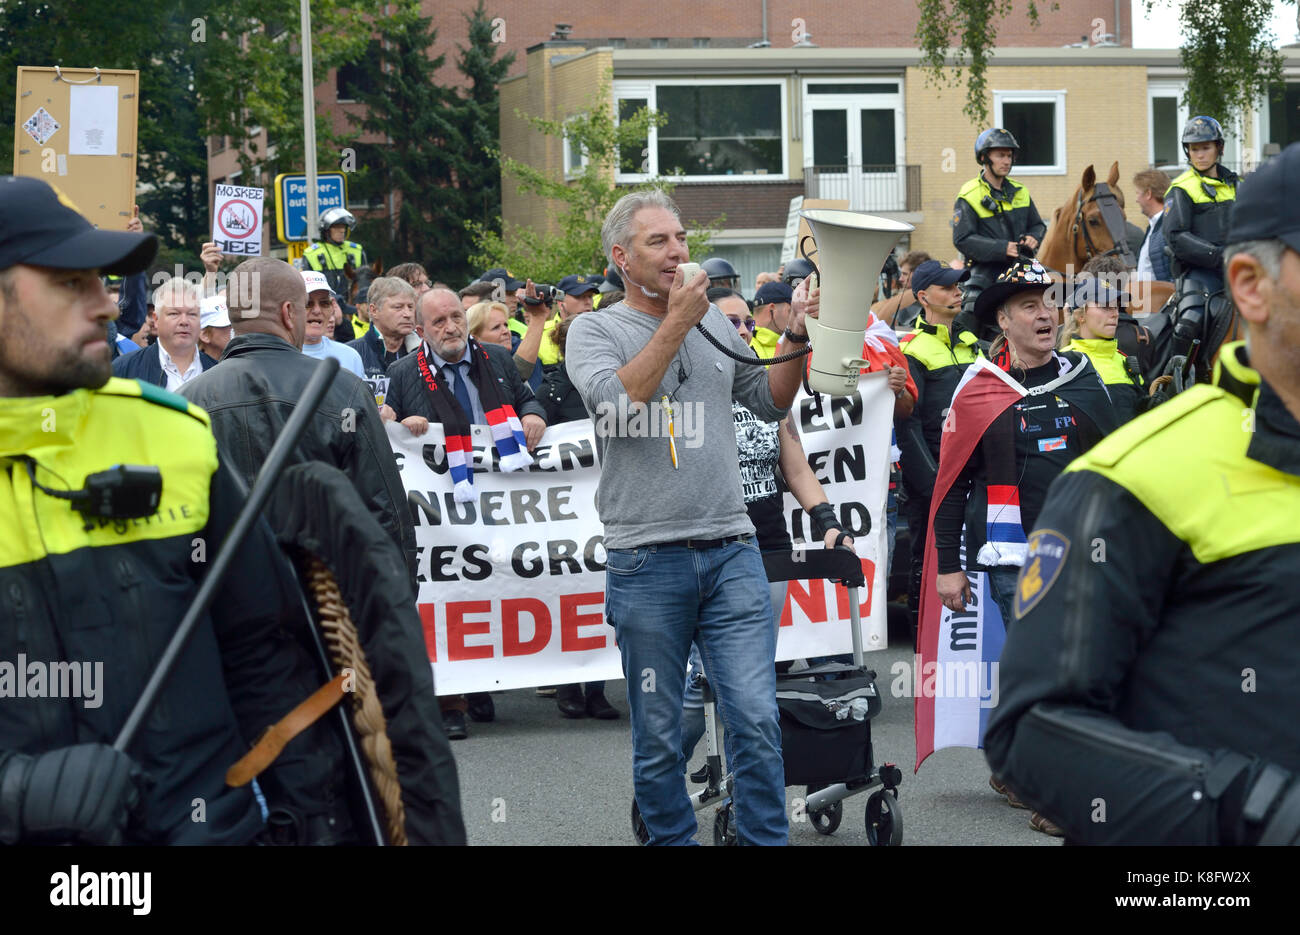 People are protesting during an anti islam demonstration of Pegida. Pegida is a group of people who are against islamization of Europe. Stock Photo